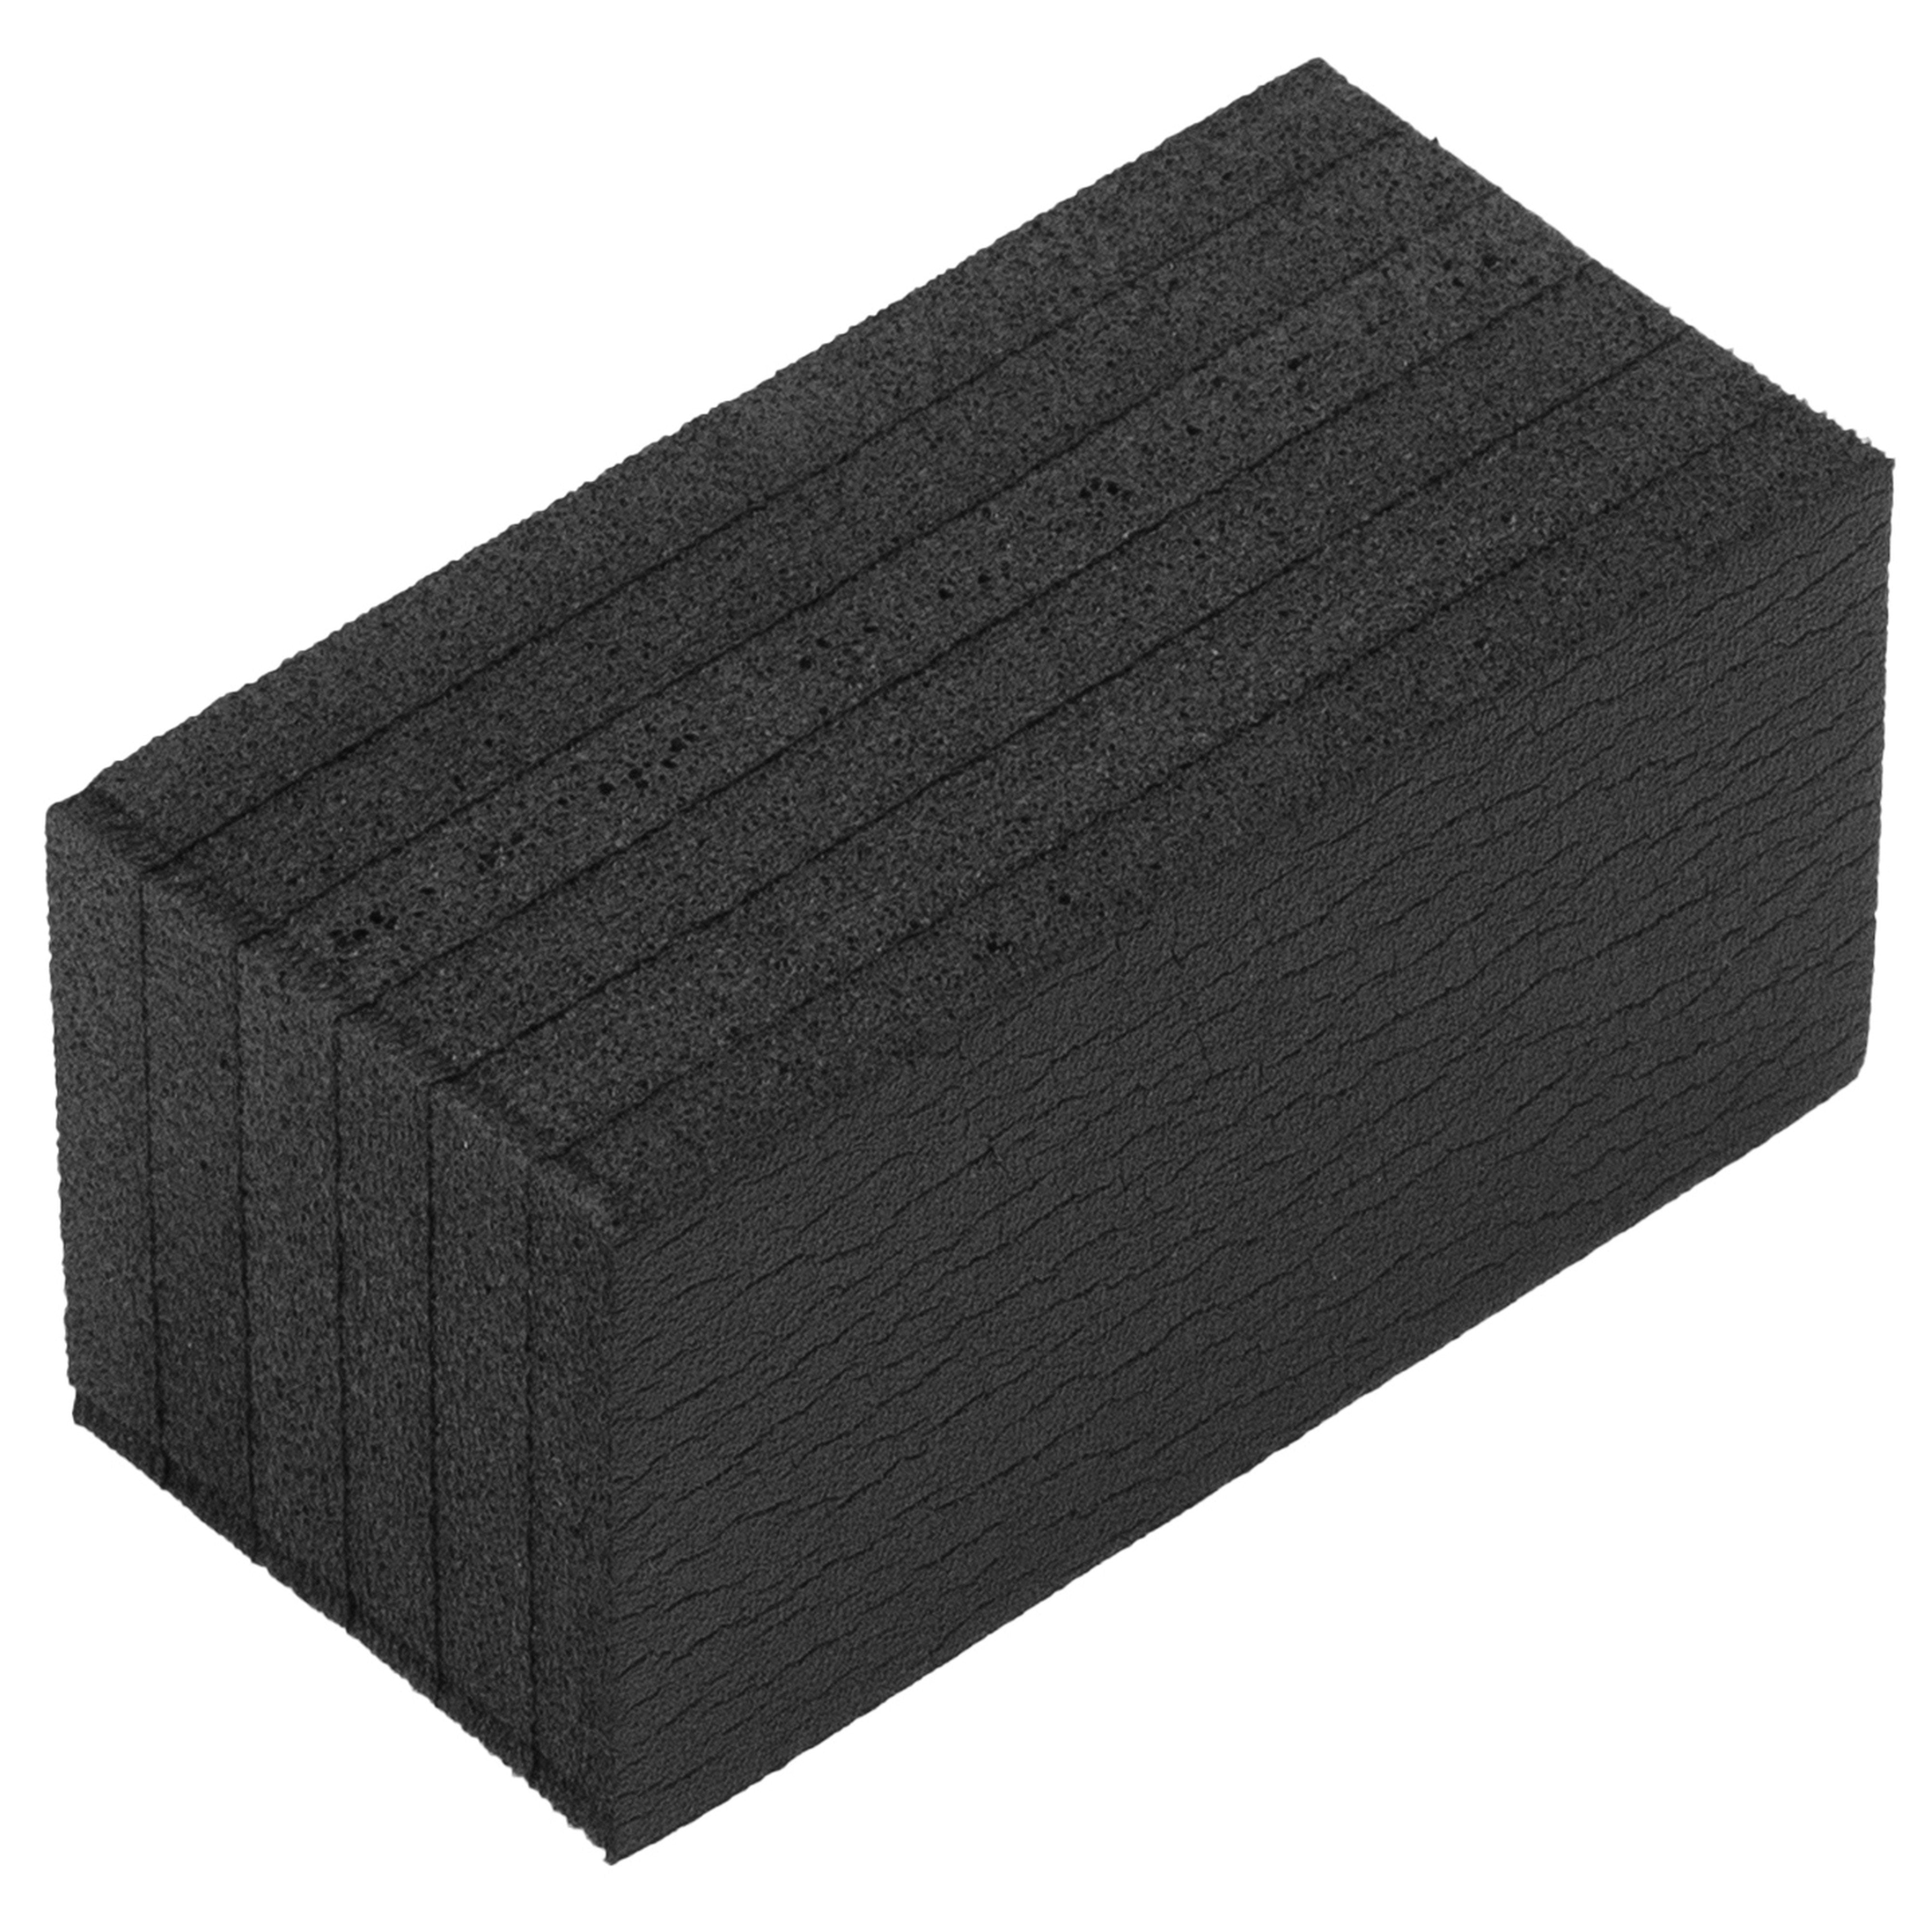 Heavy Duty Foam Dunnage Reusable Cushion for Shipping Box Crate 2x4x2